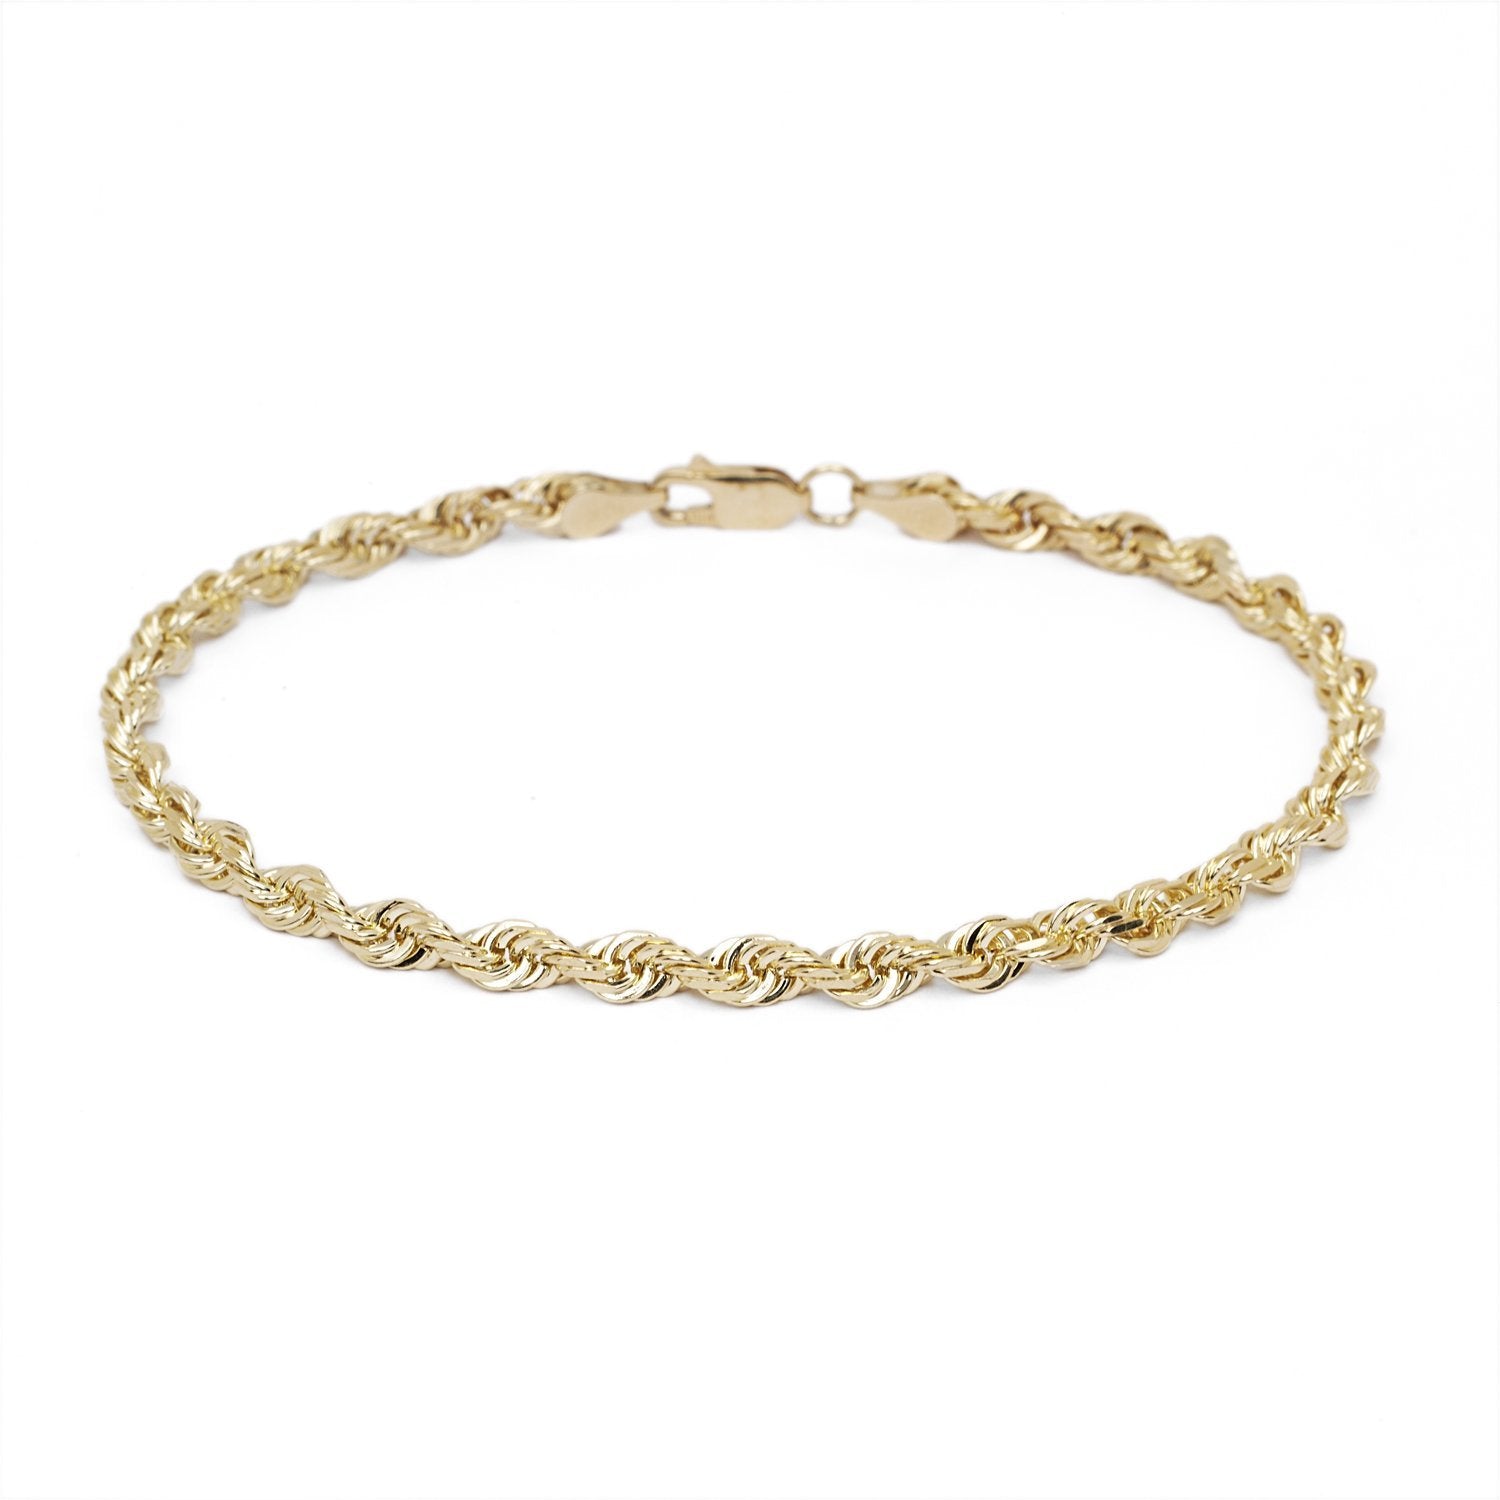 10k Yellow Gold Hollow Rope Chain Bracelet and Anklet for Men & Women, 5mm